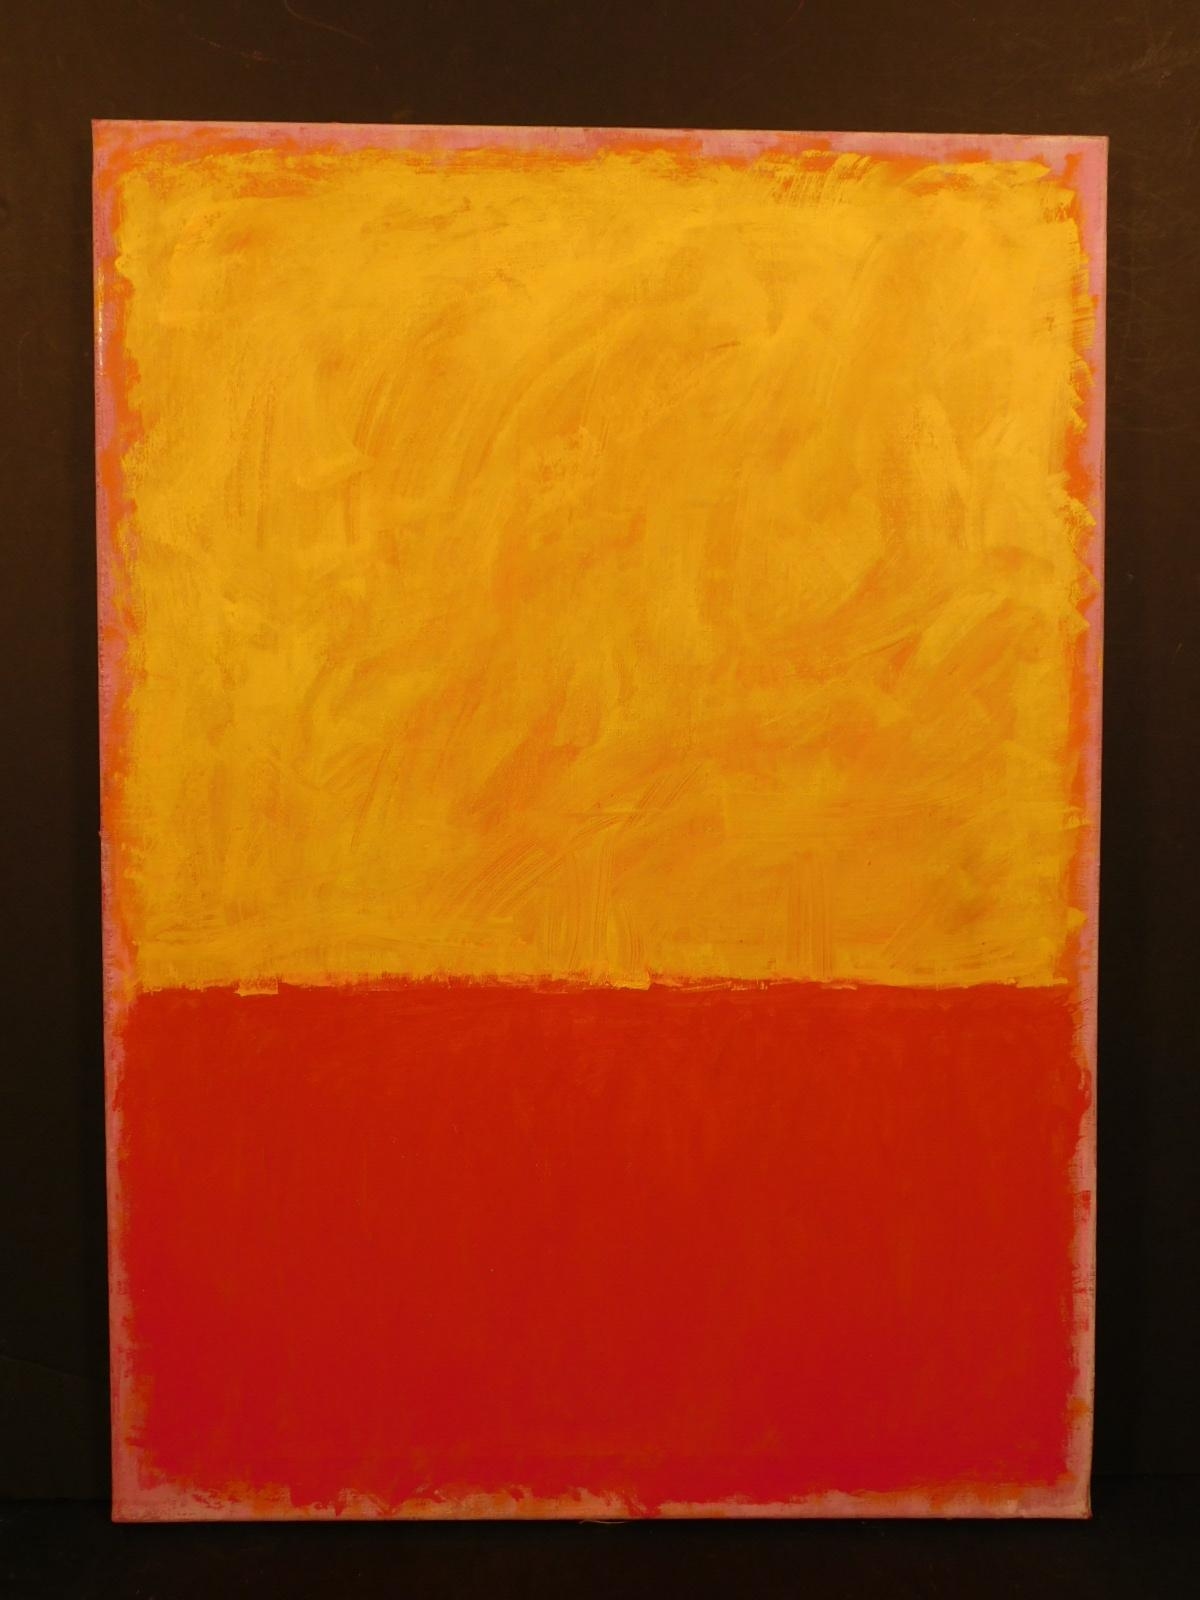 Color Field ( Red and Yellow) by Mark Rothko, 1968